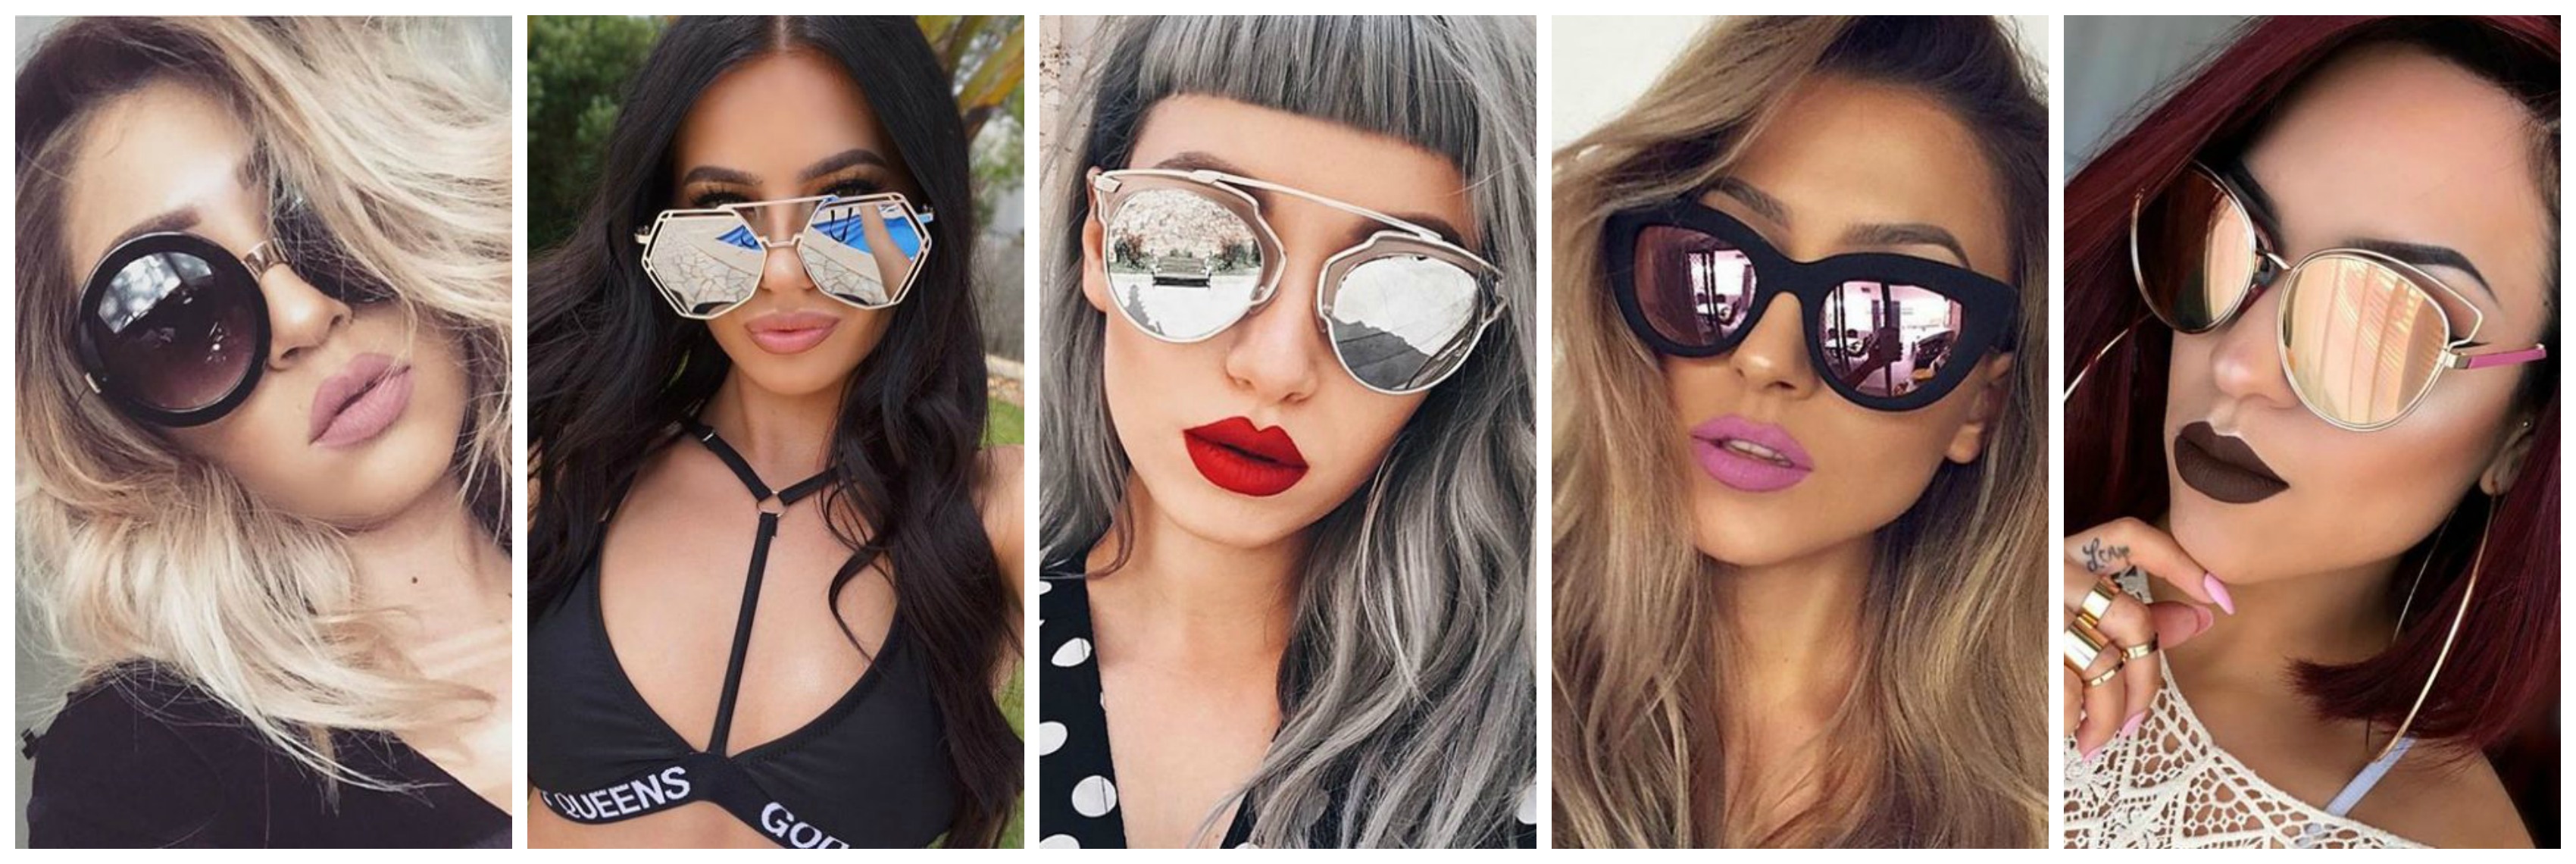 6 Sunglasses Trends You're Going to See on Everyone This Summer